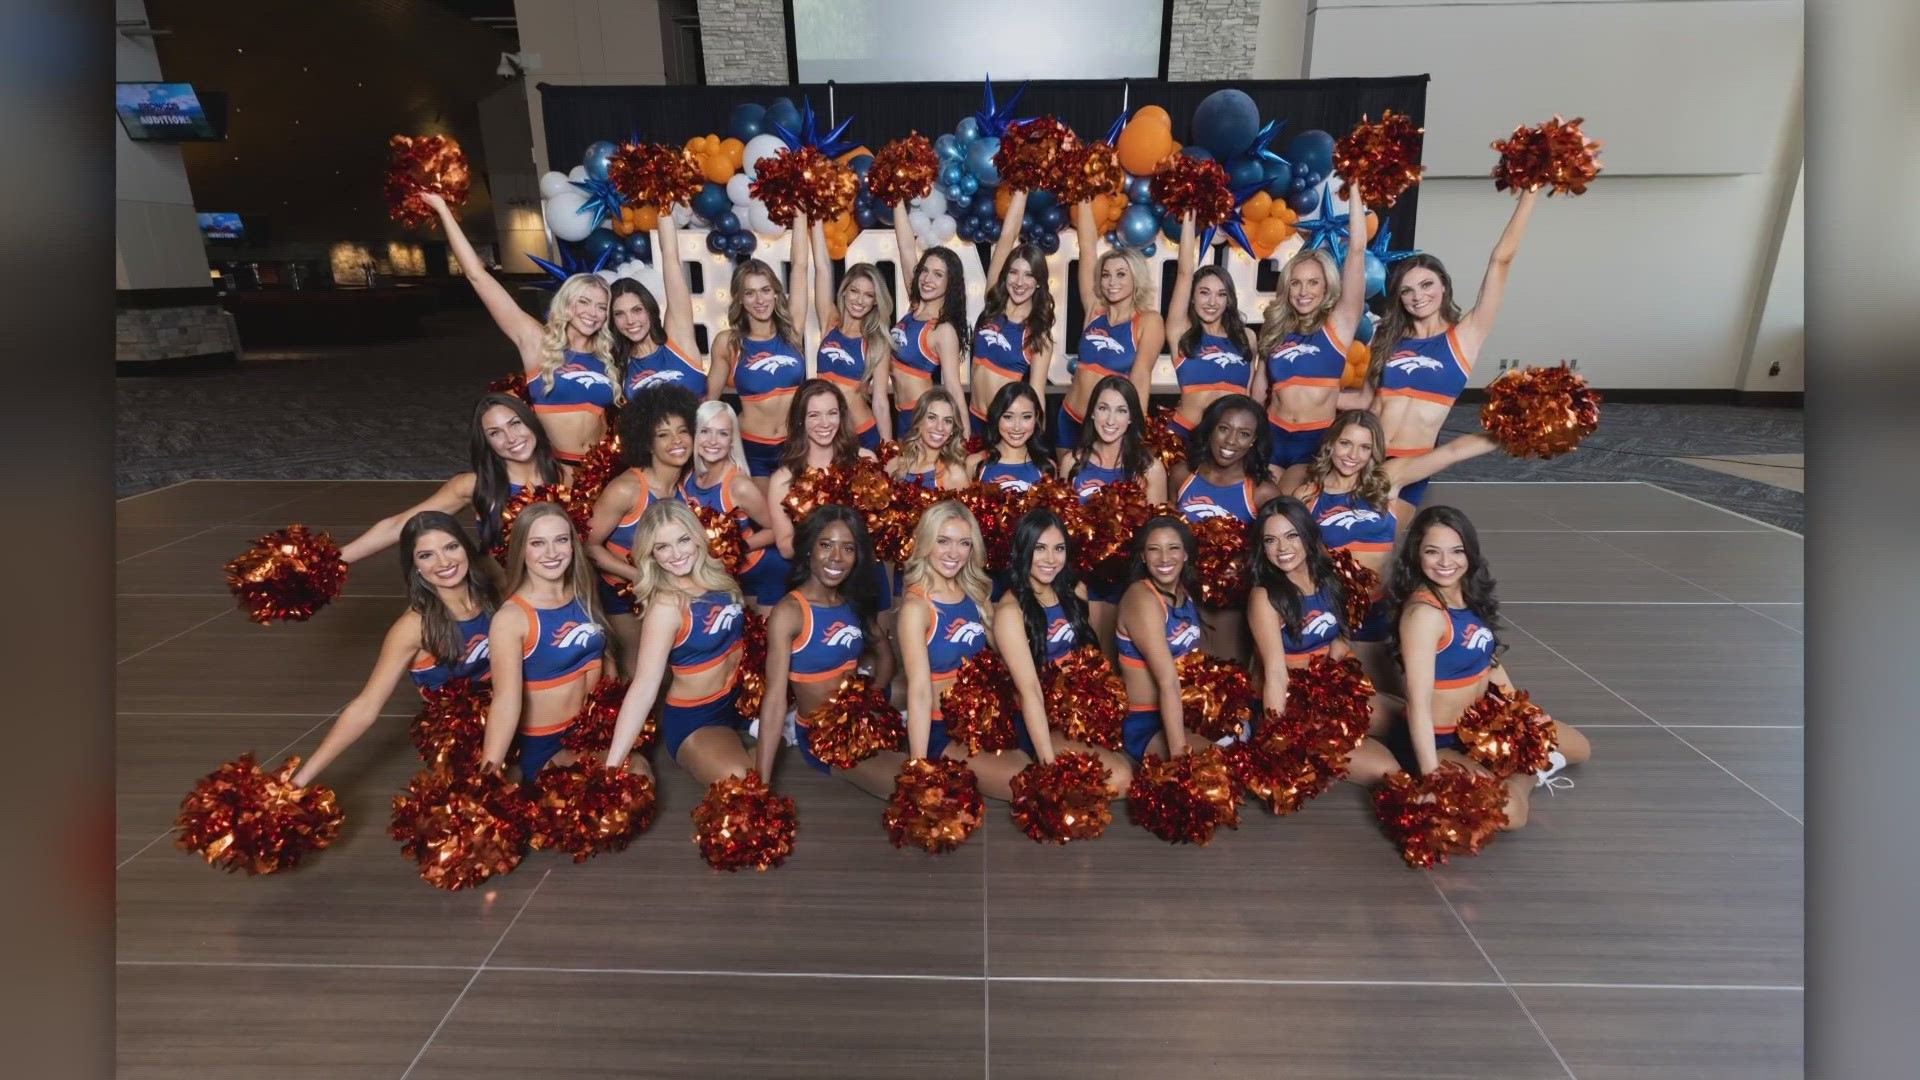 Cheerleaders represent the Broncos at games, charitable appearances and sponsor events as brand ambassadors.